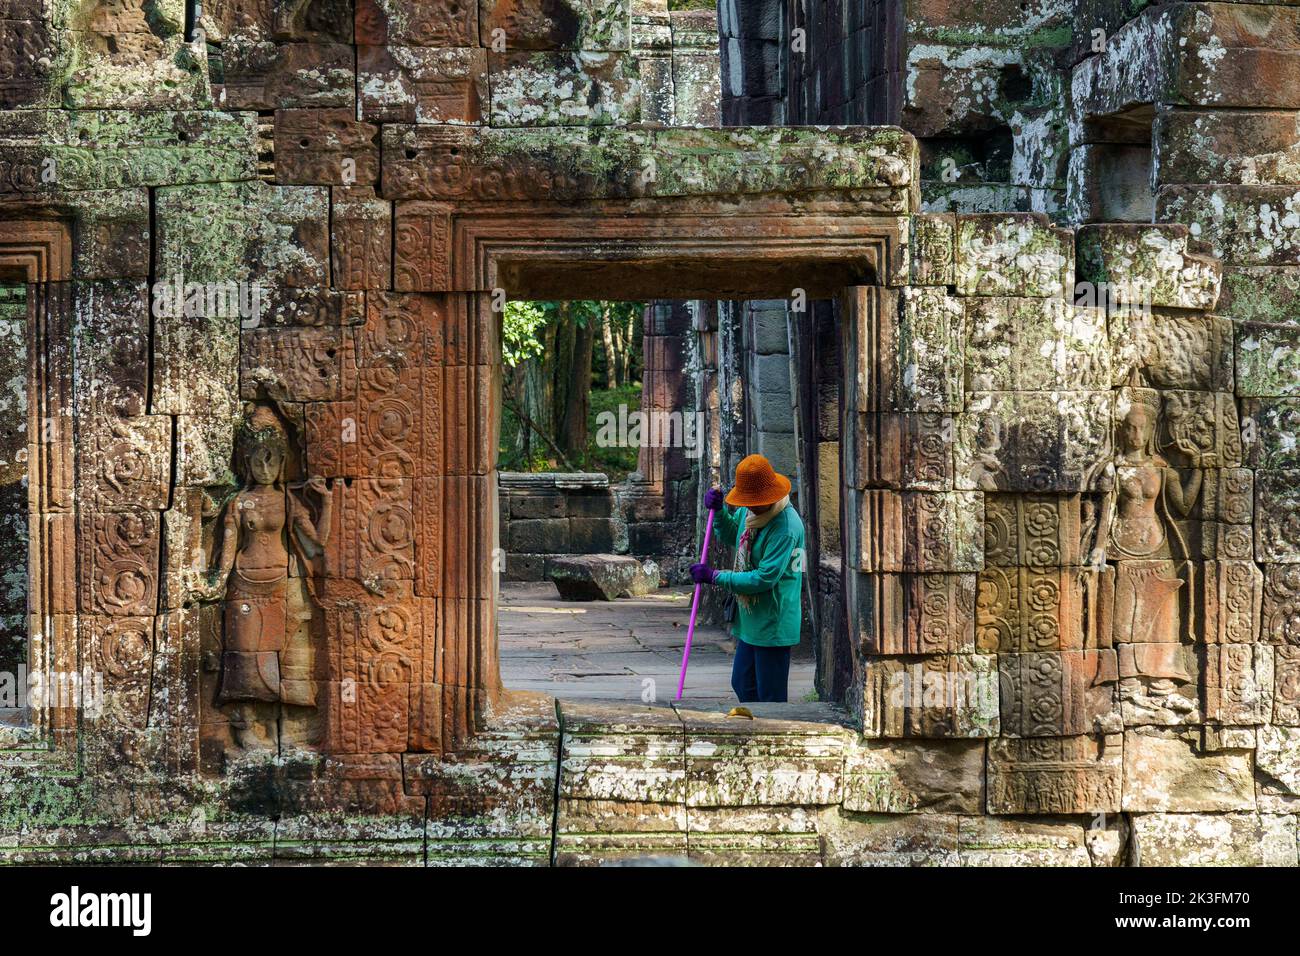 Cambodia. Siem Reap Province. The archaeological park of Angkor. A woman cleans the old ruins of Banteay Kdei Temple Stock Photo